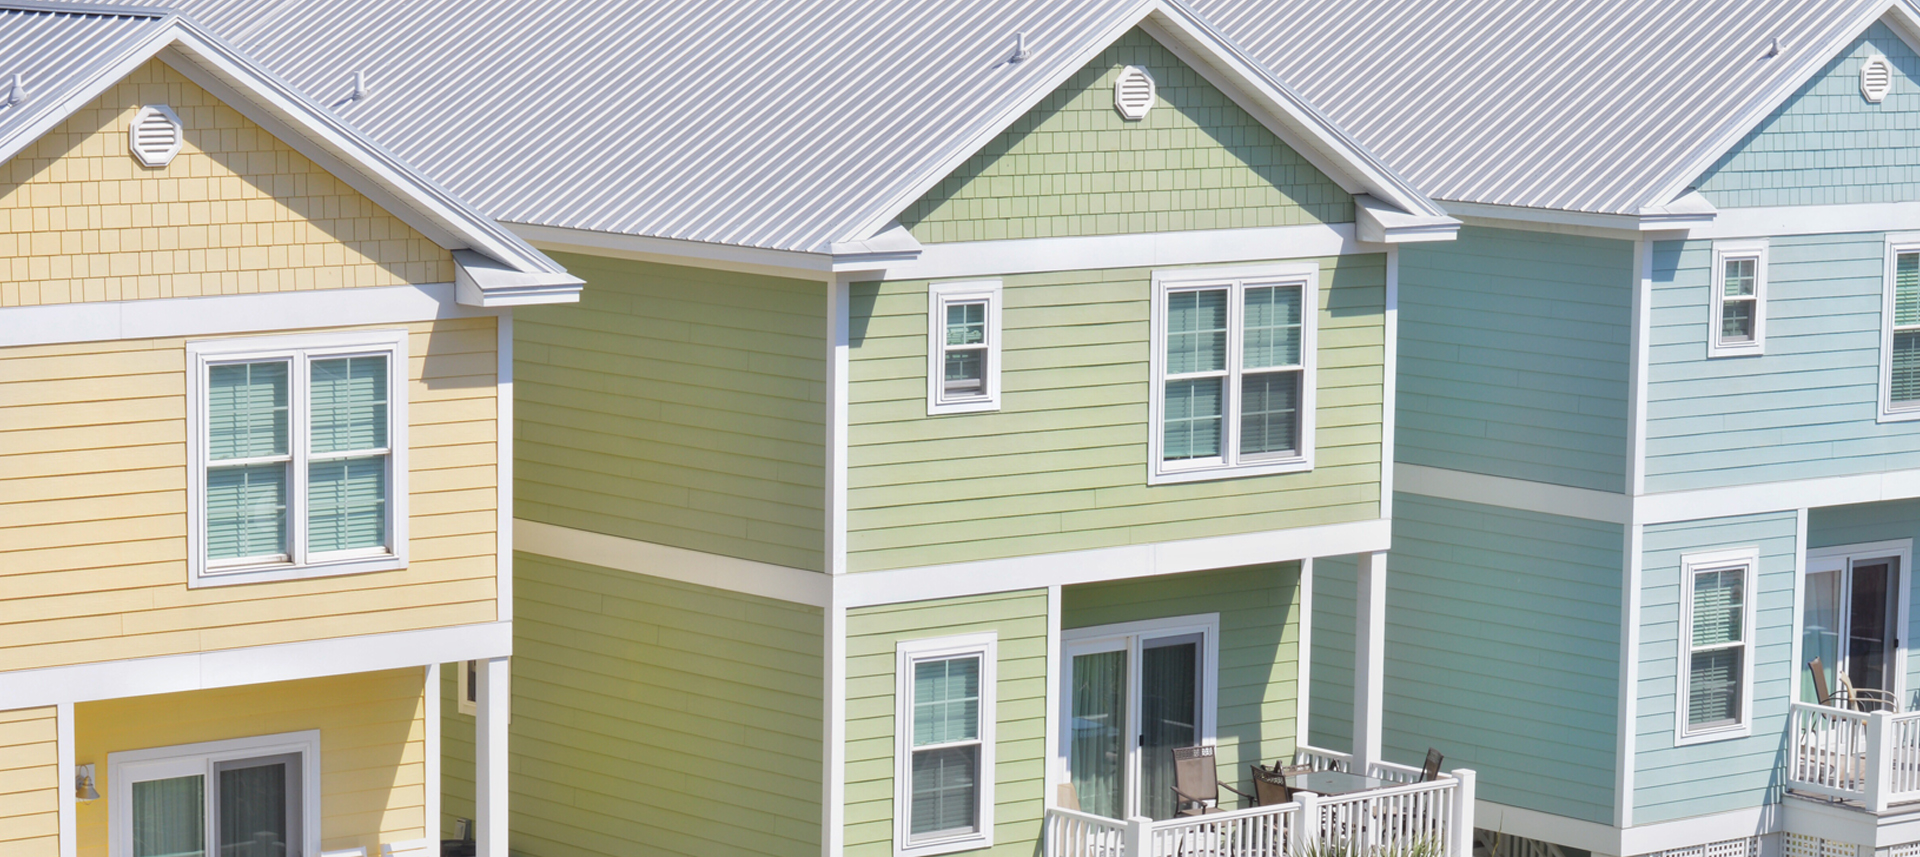 Yunk Roofing Remodeling - siding installation - wide variety of colors and styles